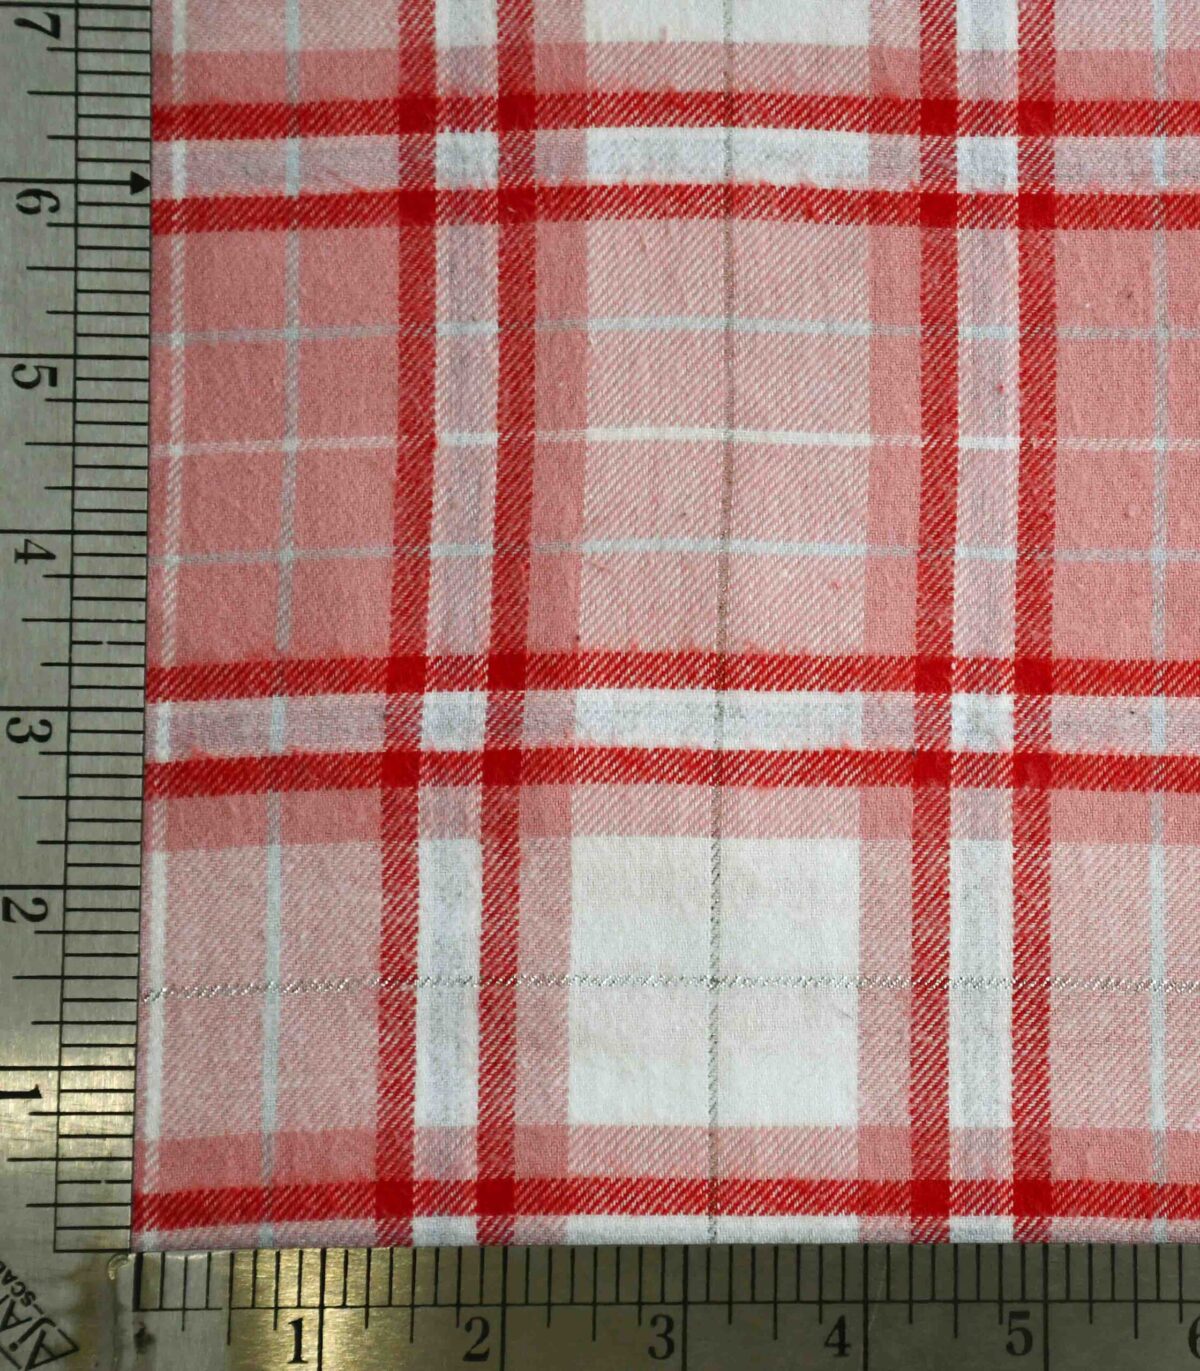 Yarn Dyed Pink & Red Checked Fabric